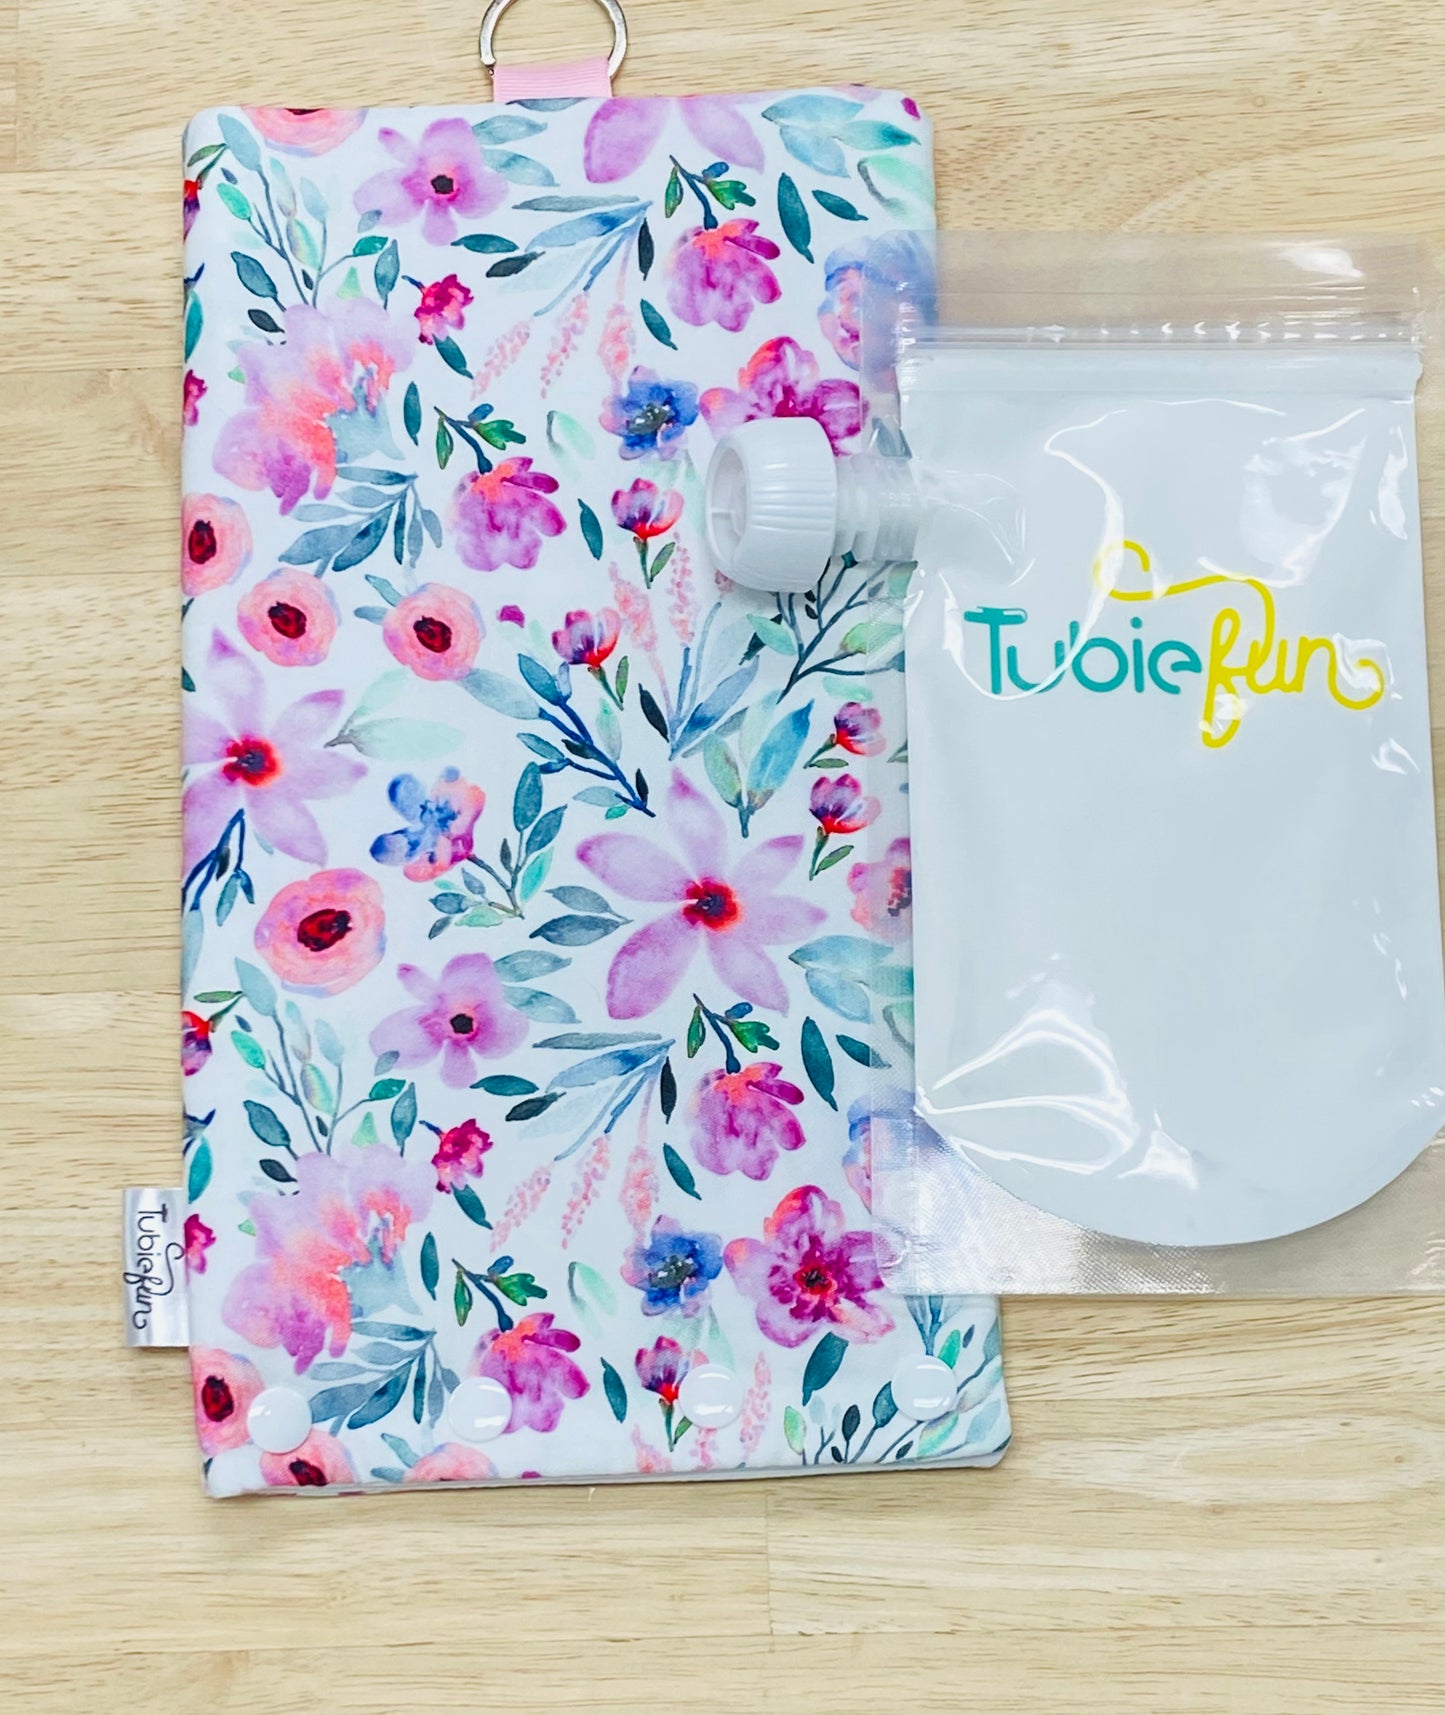 Insulated Milk Bag Suitable for Tubie Fun 500ml Reusable Pouches - Pink Flowers on White